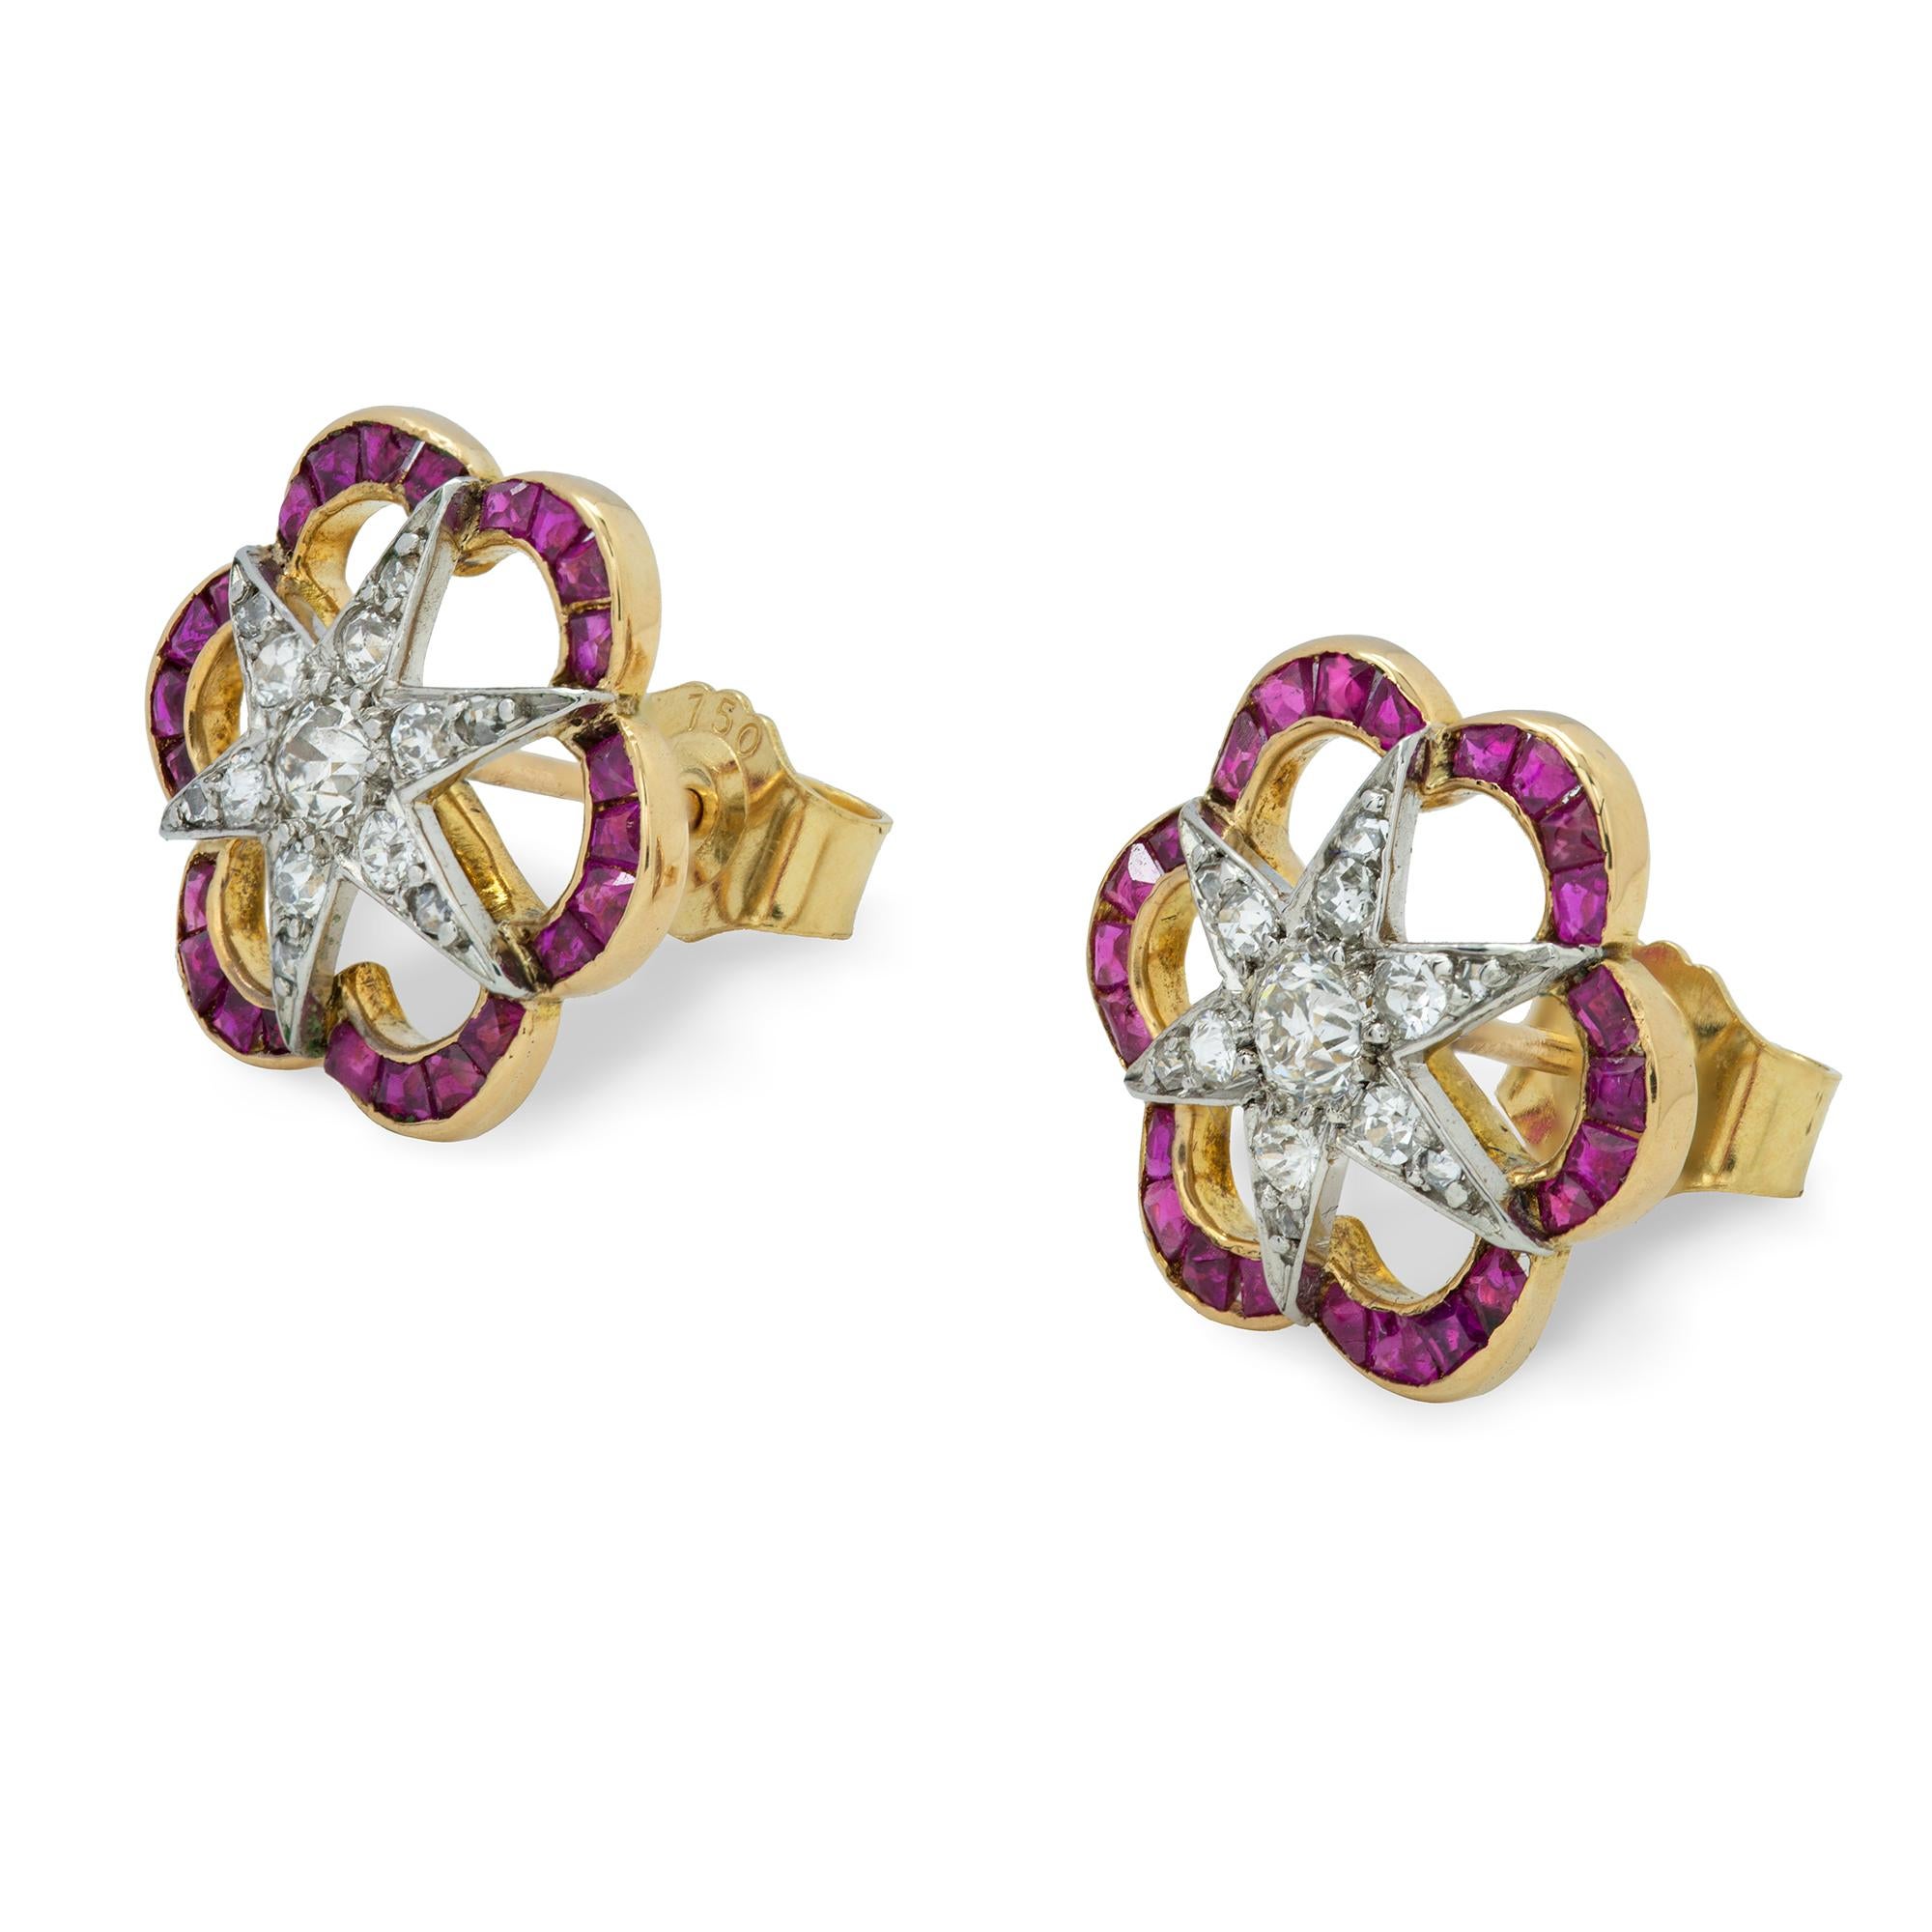 A pair of Edwardian diamond and ruby earrings, the central star motif centred with an old brilliant-cut diamond to six radiating arms set with graduated old-cut diamonds, total diamond weight approximately 0.45 carat, within an openwork